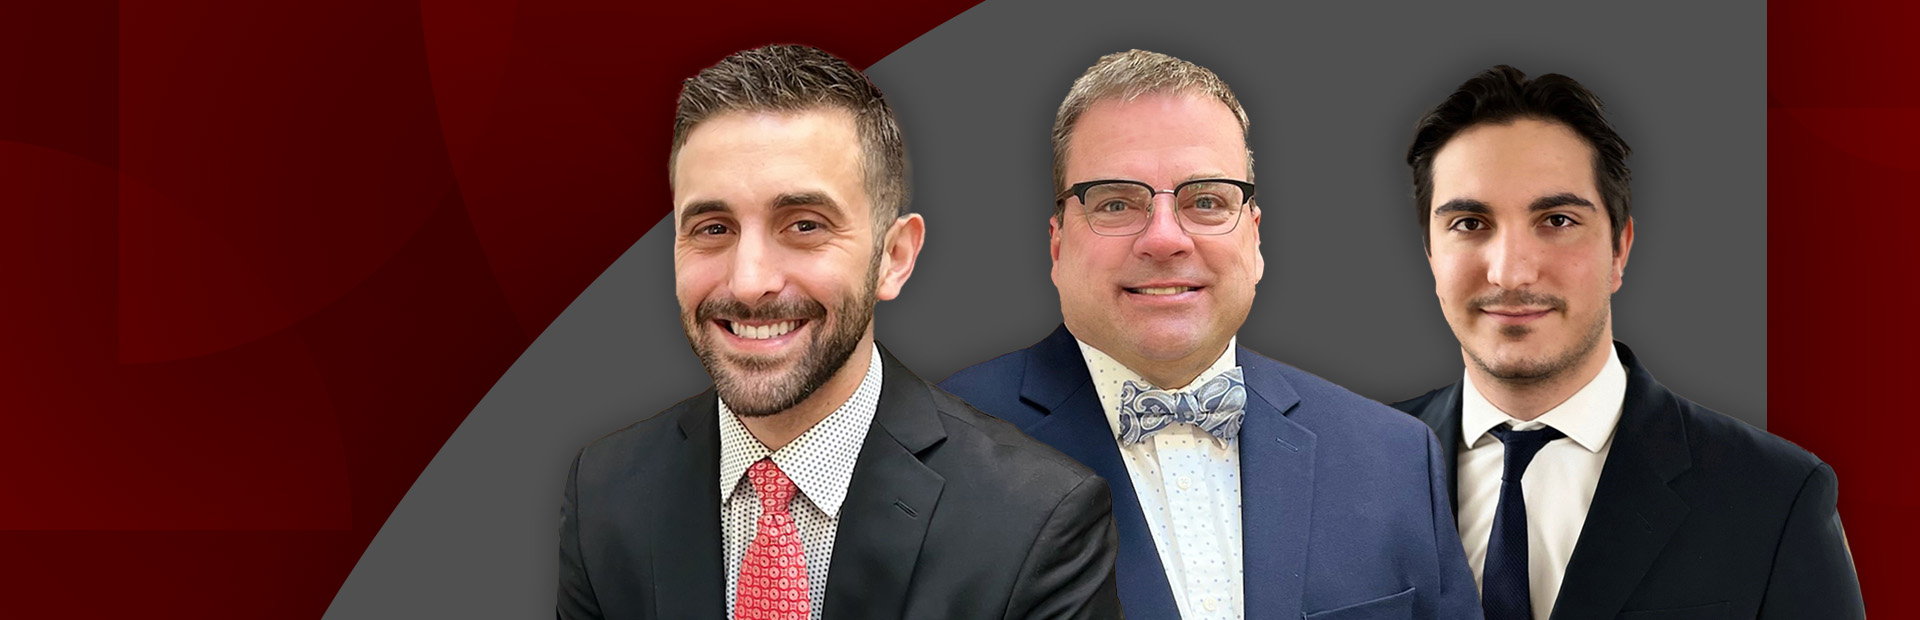 PWCampbell Adds Three Dynamic Sales Professionals